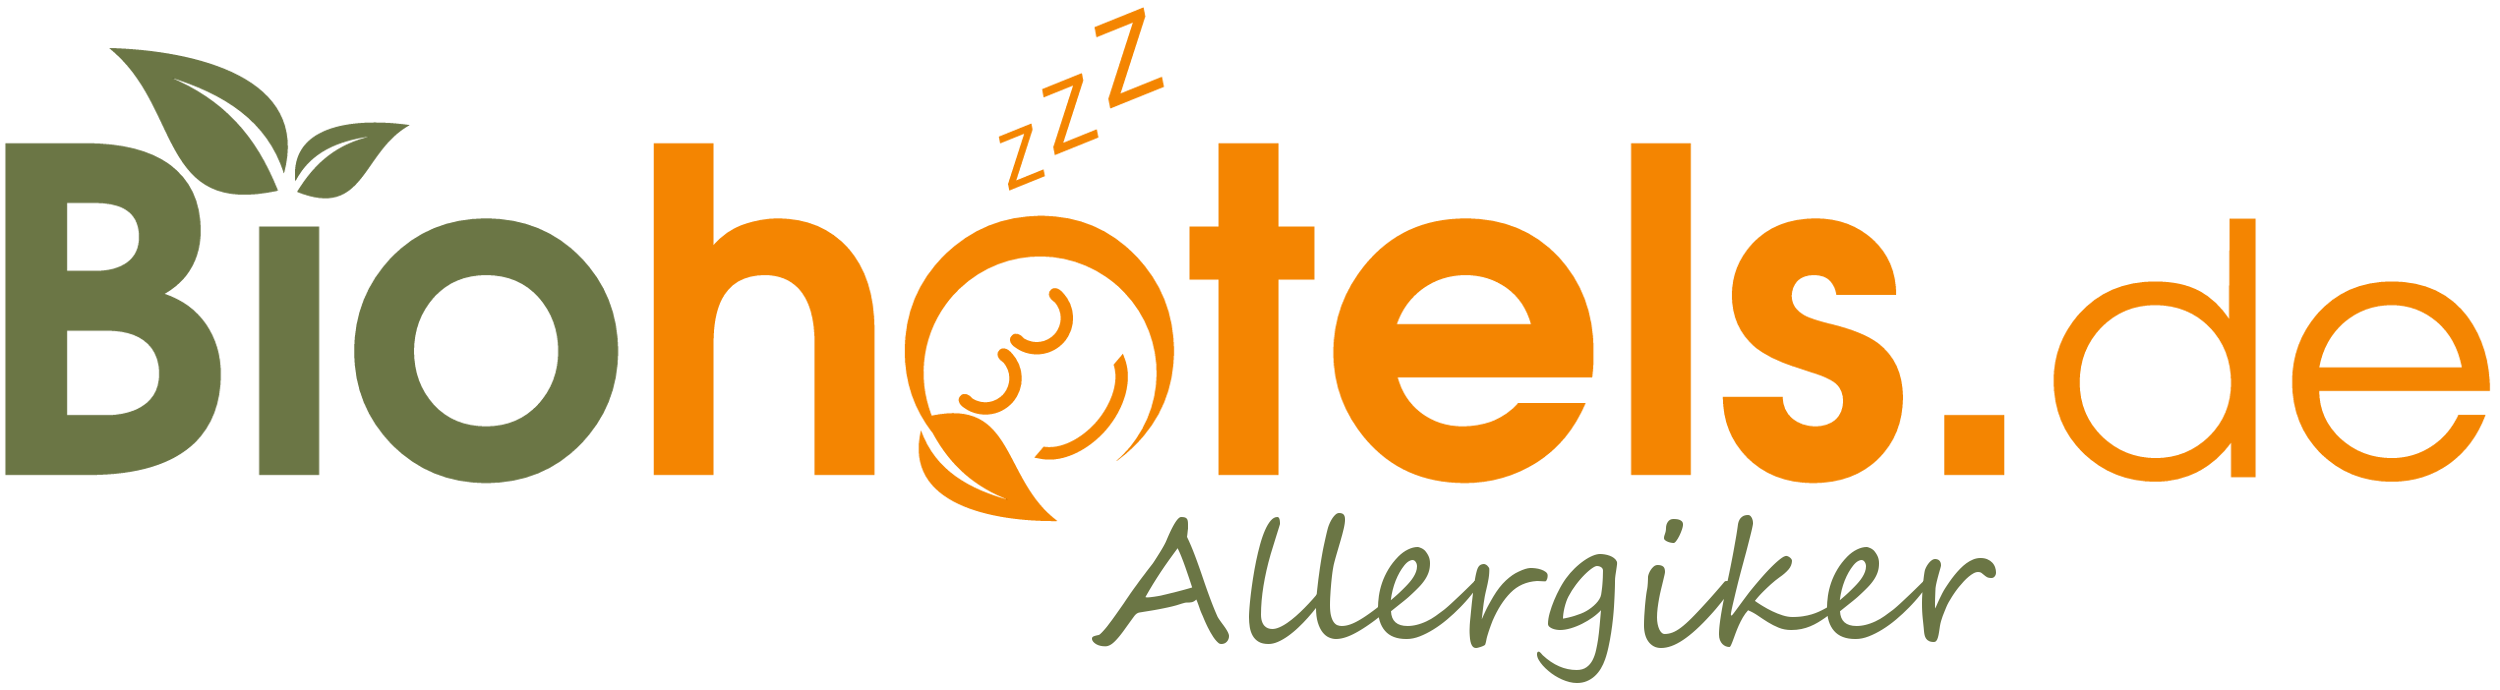 Organic hotels for allergy sufferers